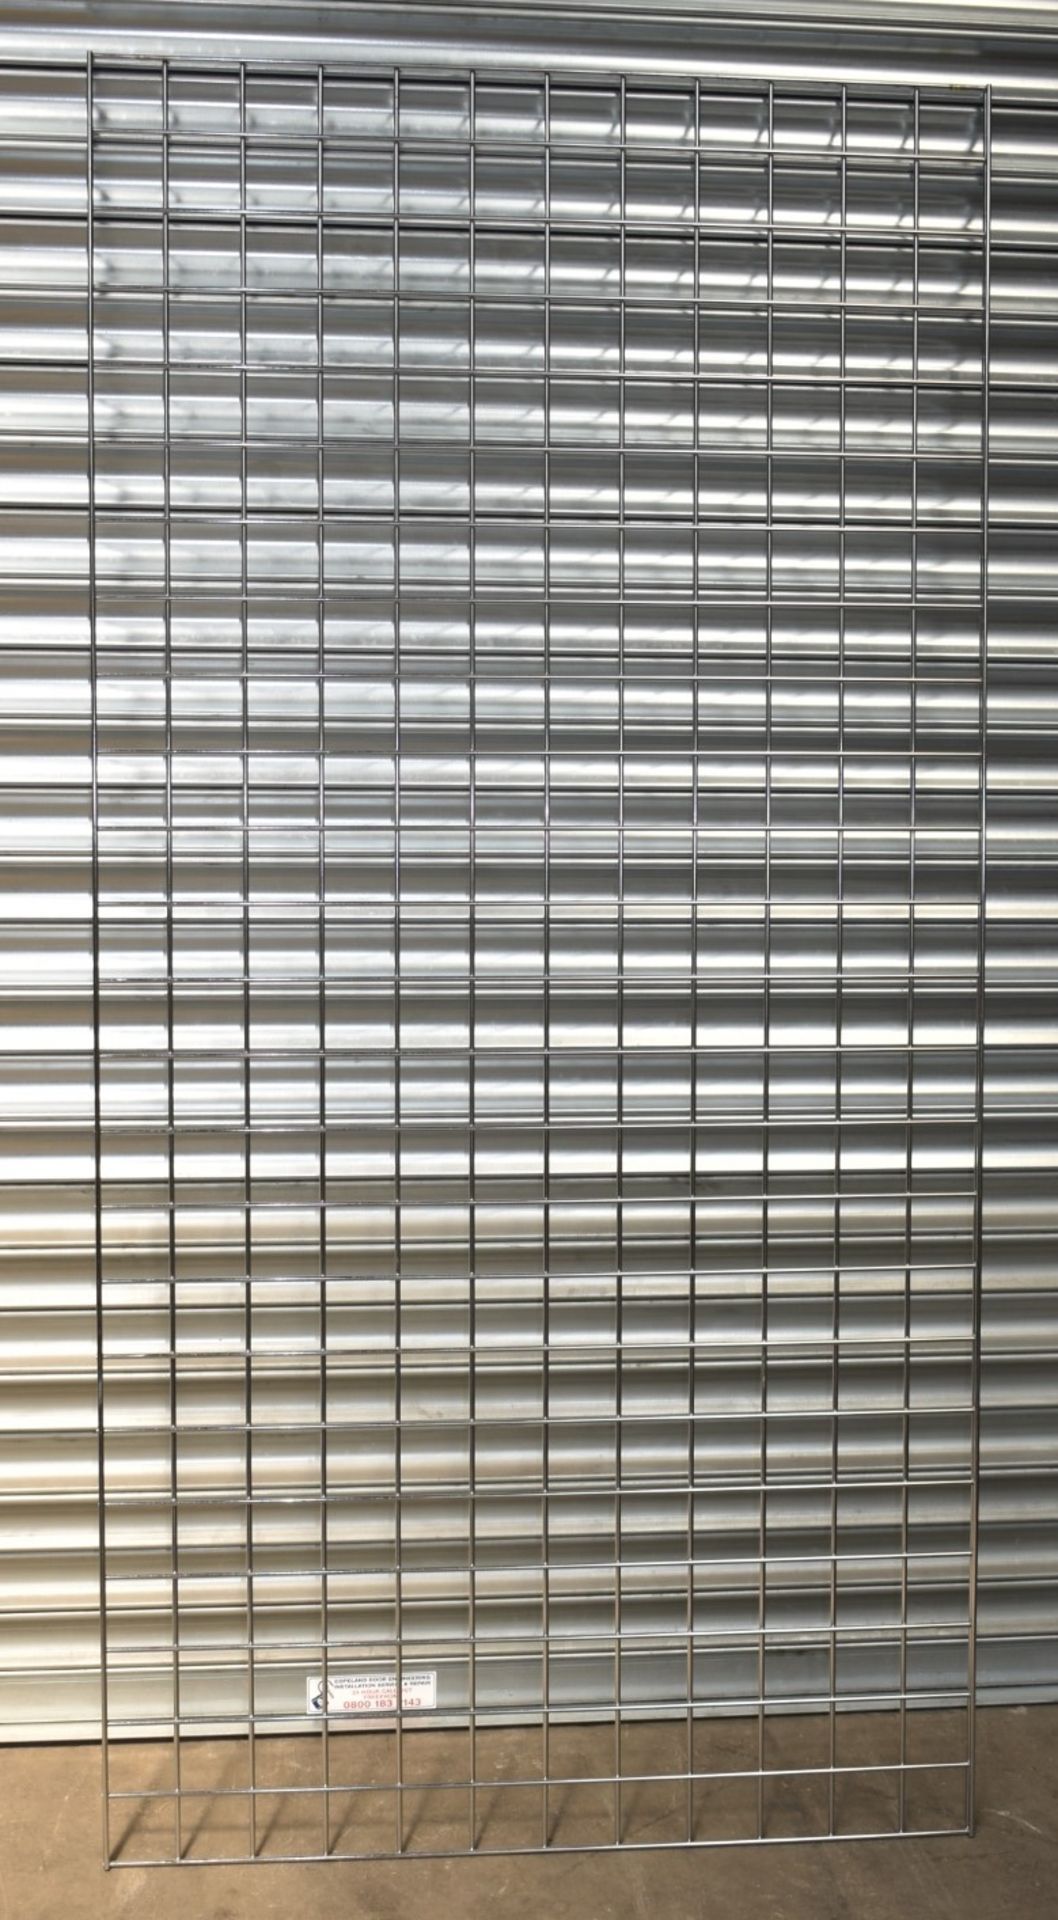 6 x Gridwall Mesh Wall Panels - Heavy Metal Construction in Chrome - Ideal For Making Security Cages - Image 2 of 7